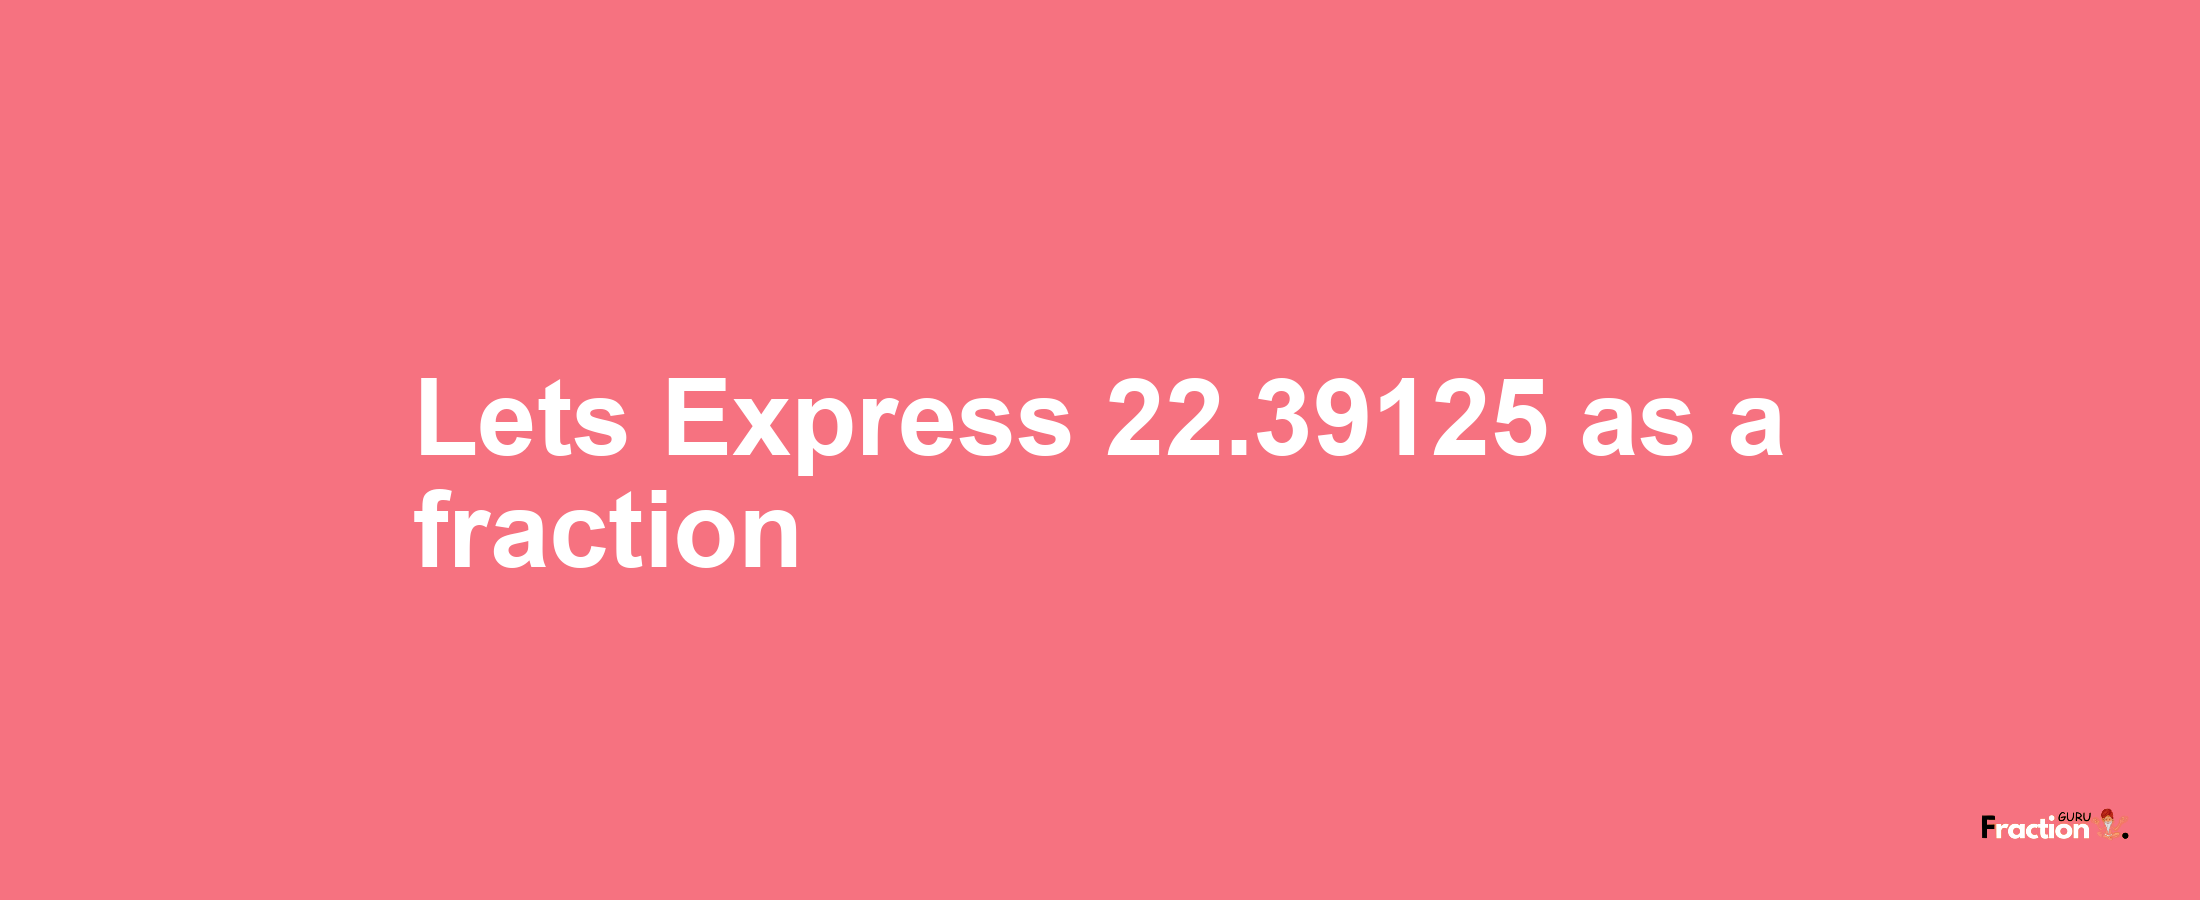 Lets Express 22.39125 as afraction